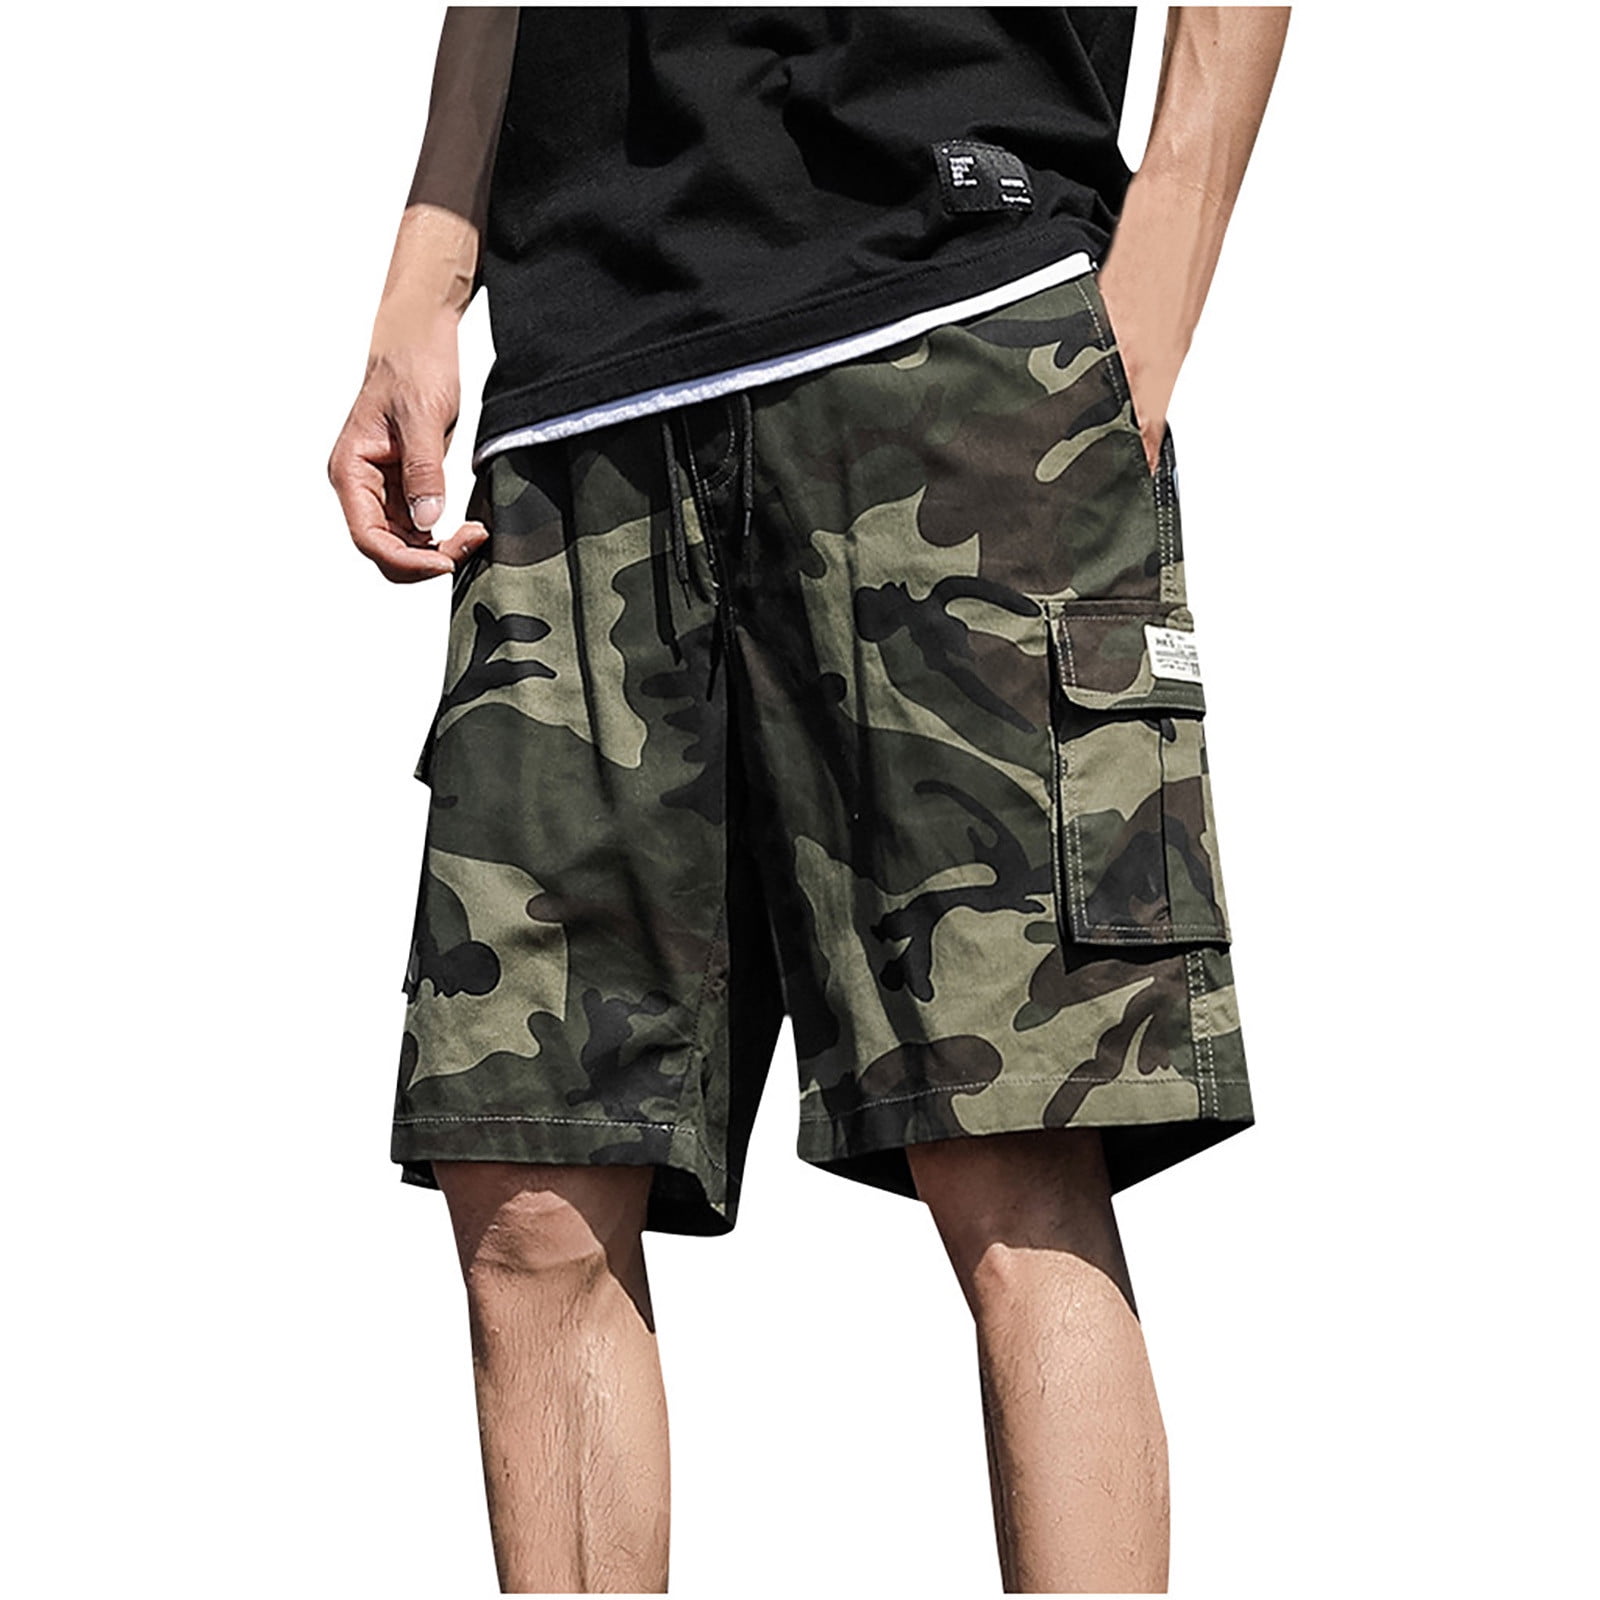  YKJATS Tactical Cargo Workout Casual Shorts for Men